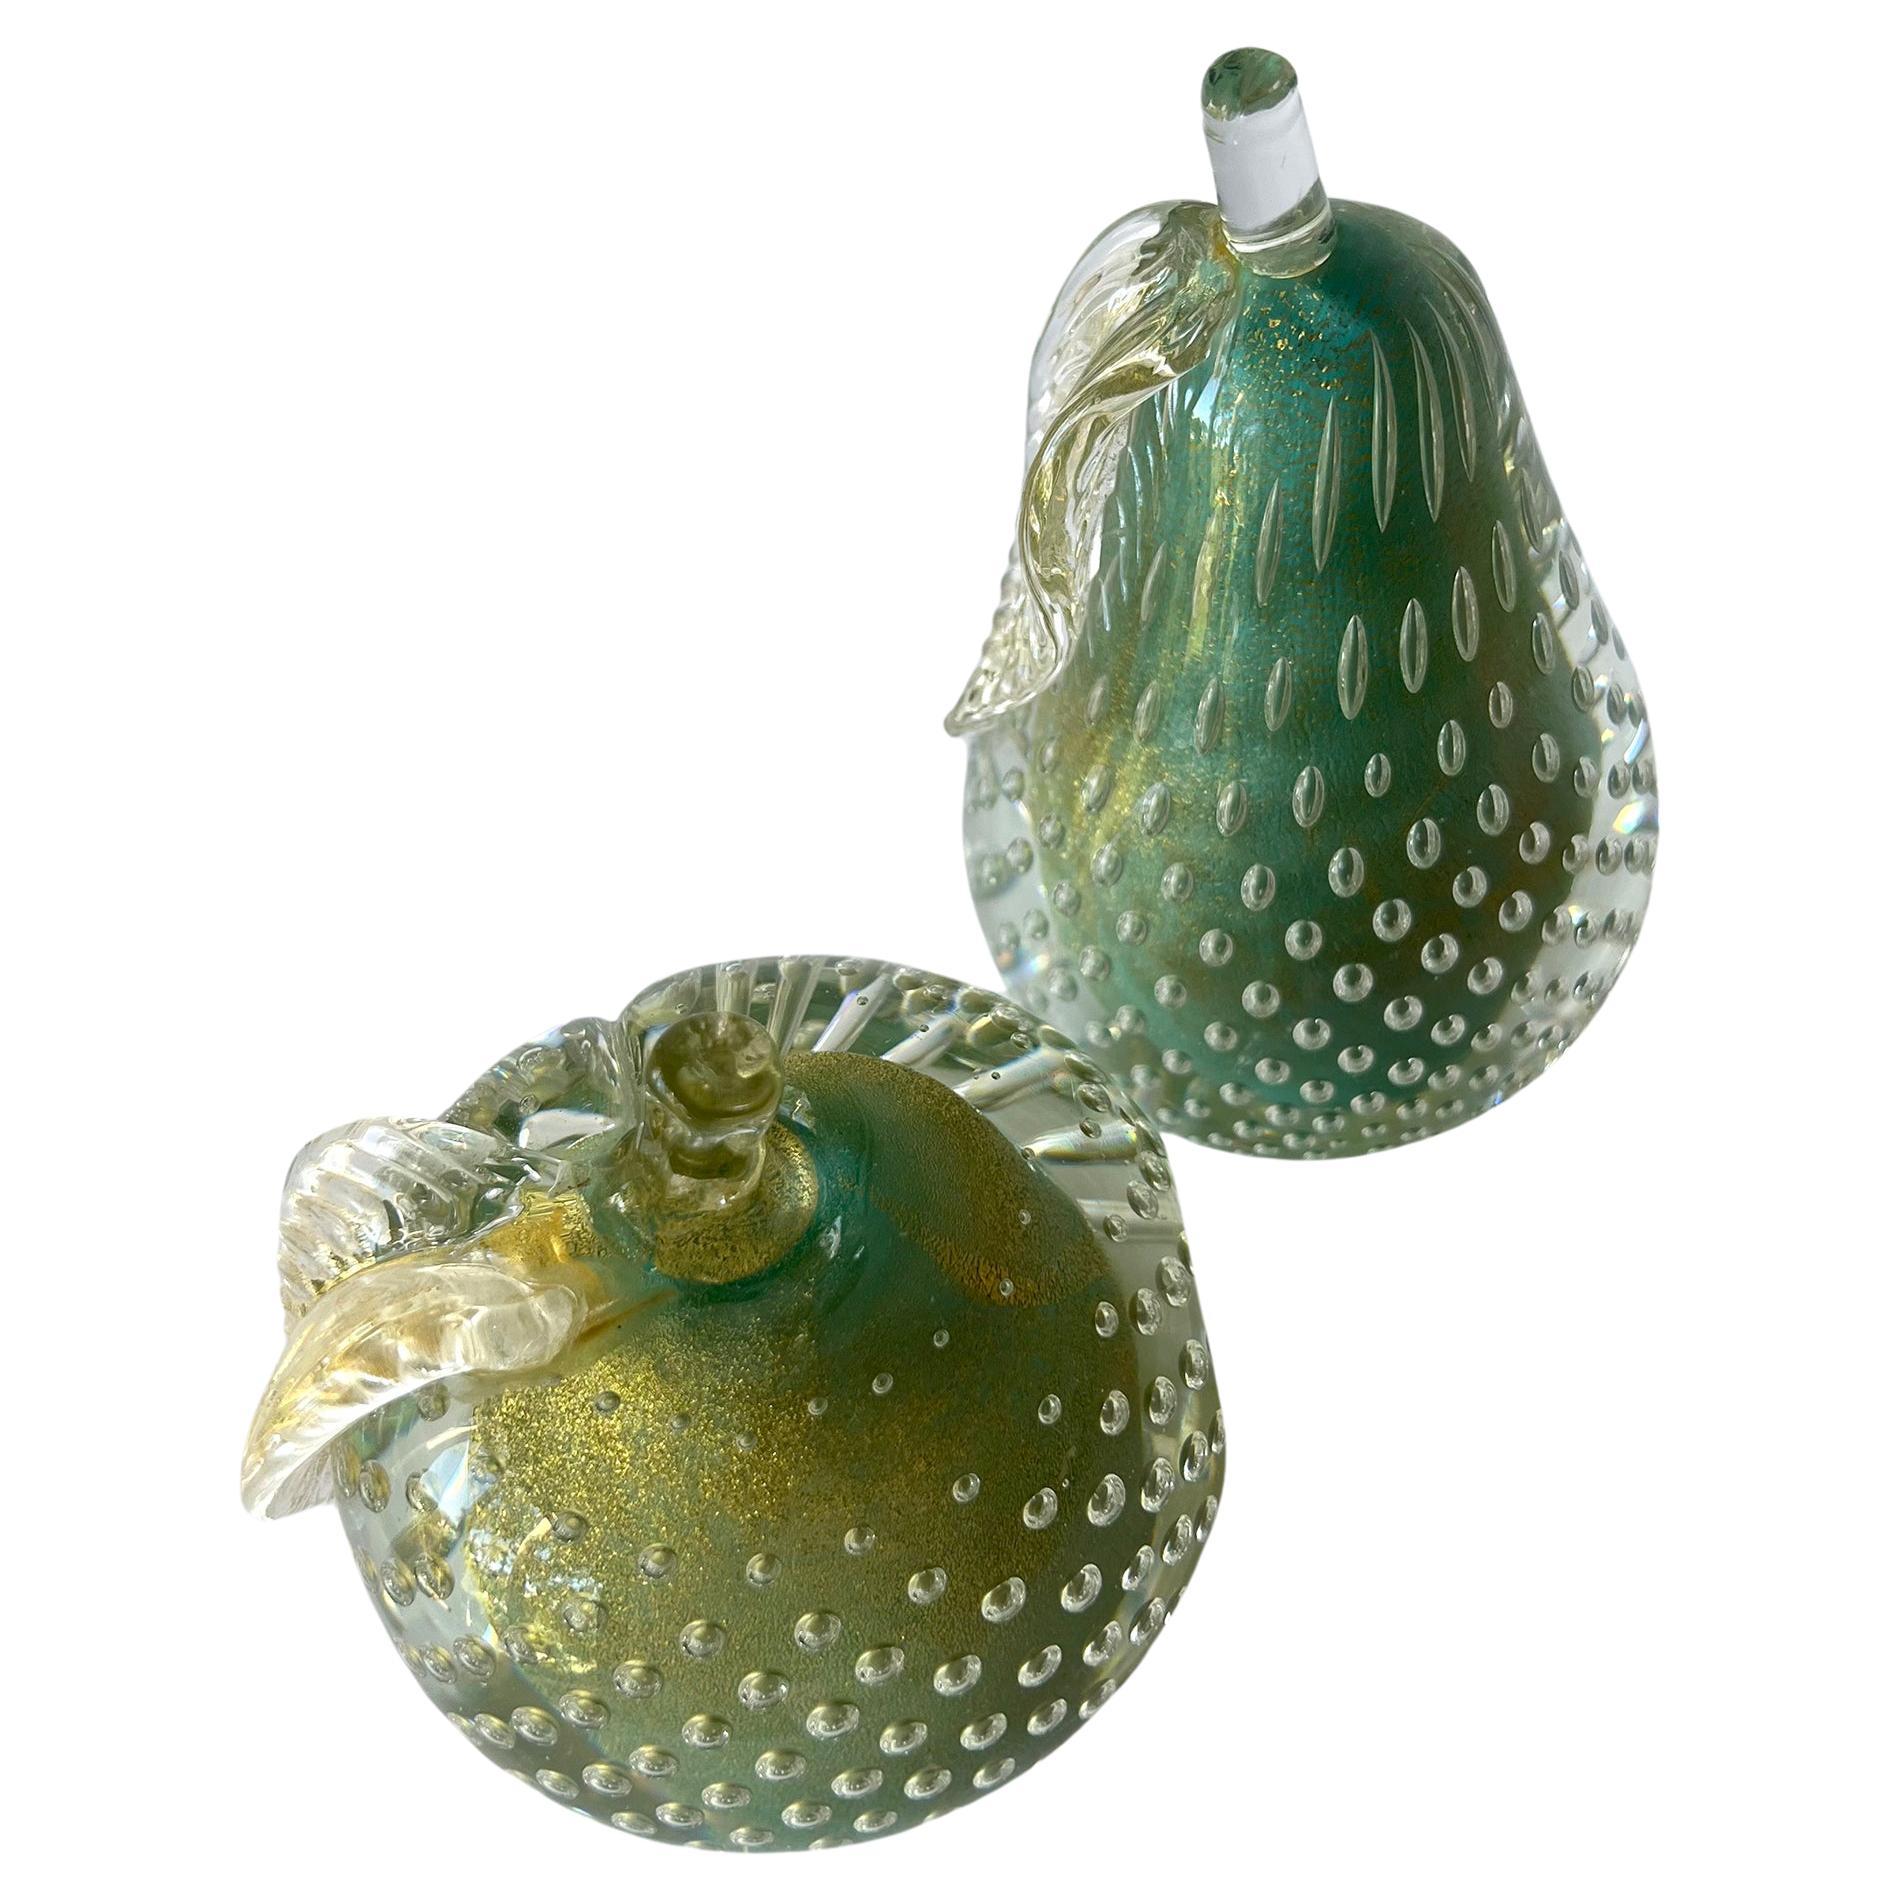 Teal Alfredo Barbini glass fruit paperweights or bookends with layers of golden aventurine within.  Made in Murano, Italy circa 1950's.  Pear measures 5